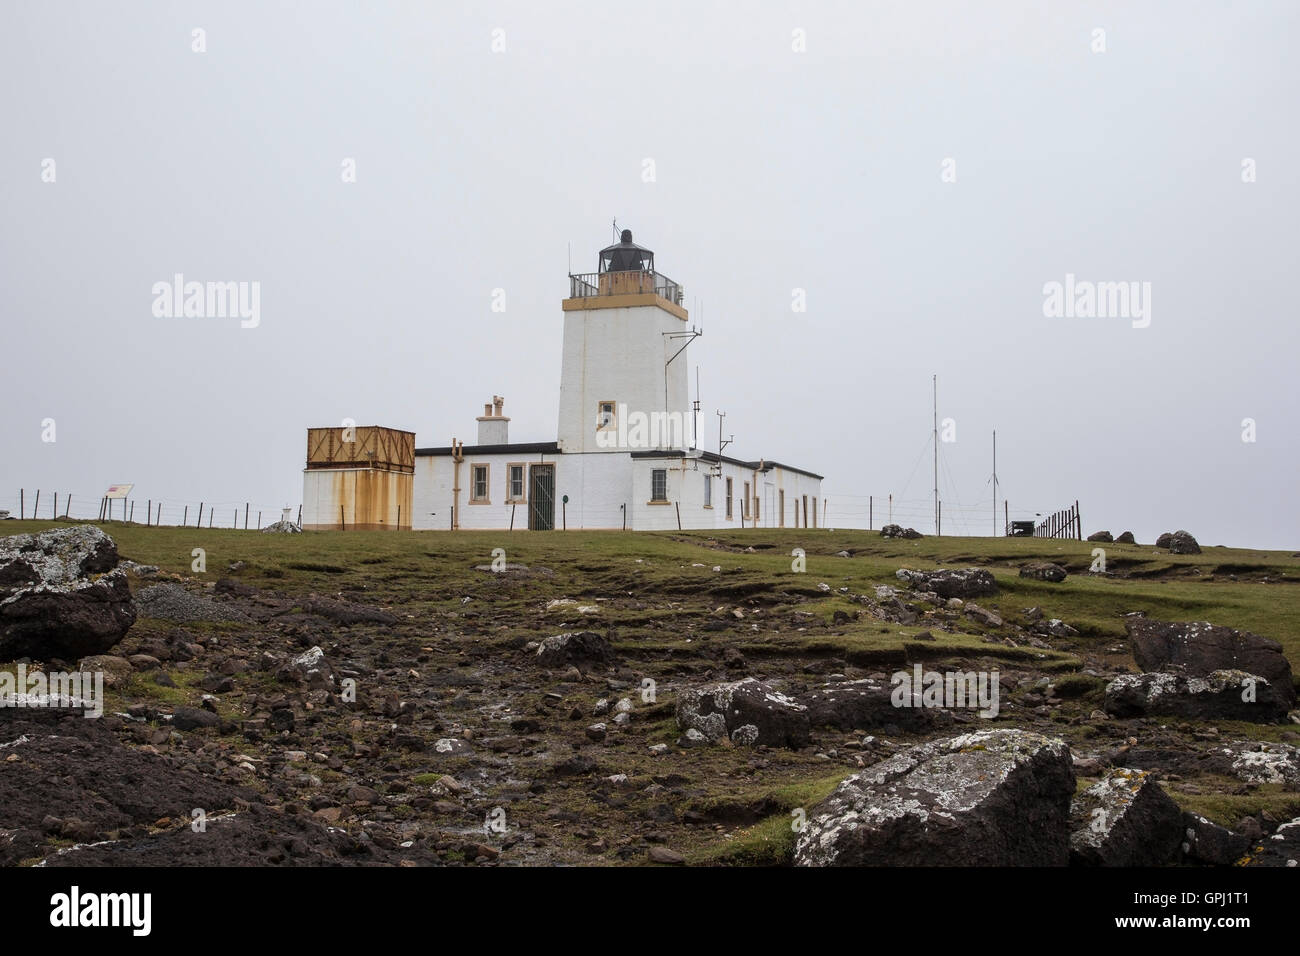 A view of Eshaness Lighthouse is situated on the Northmavine peninsula in the north-west of the Shetland Islands, Scotland. Stock Photo